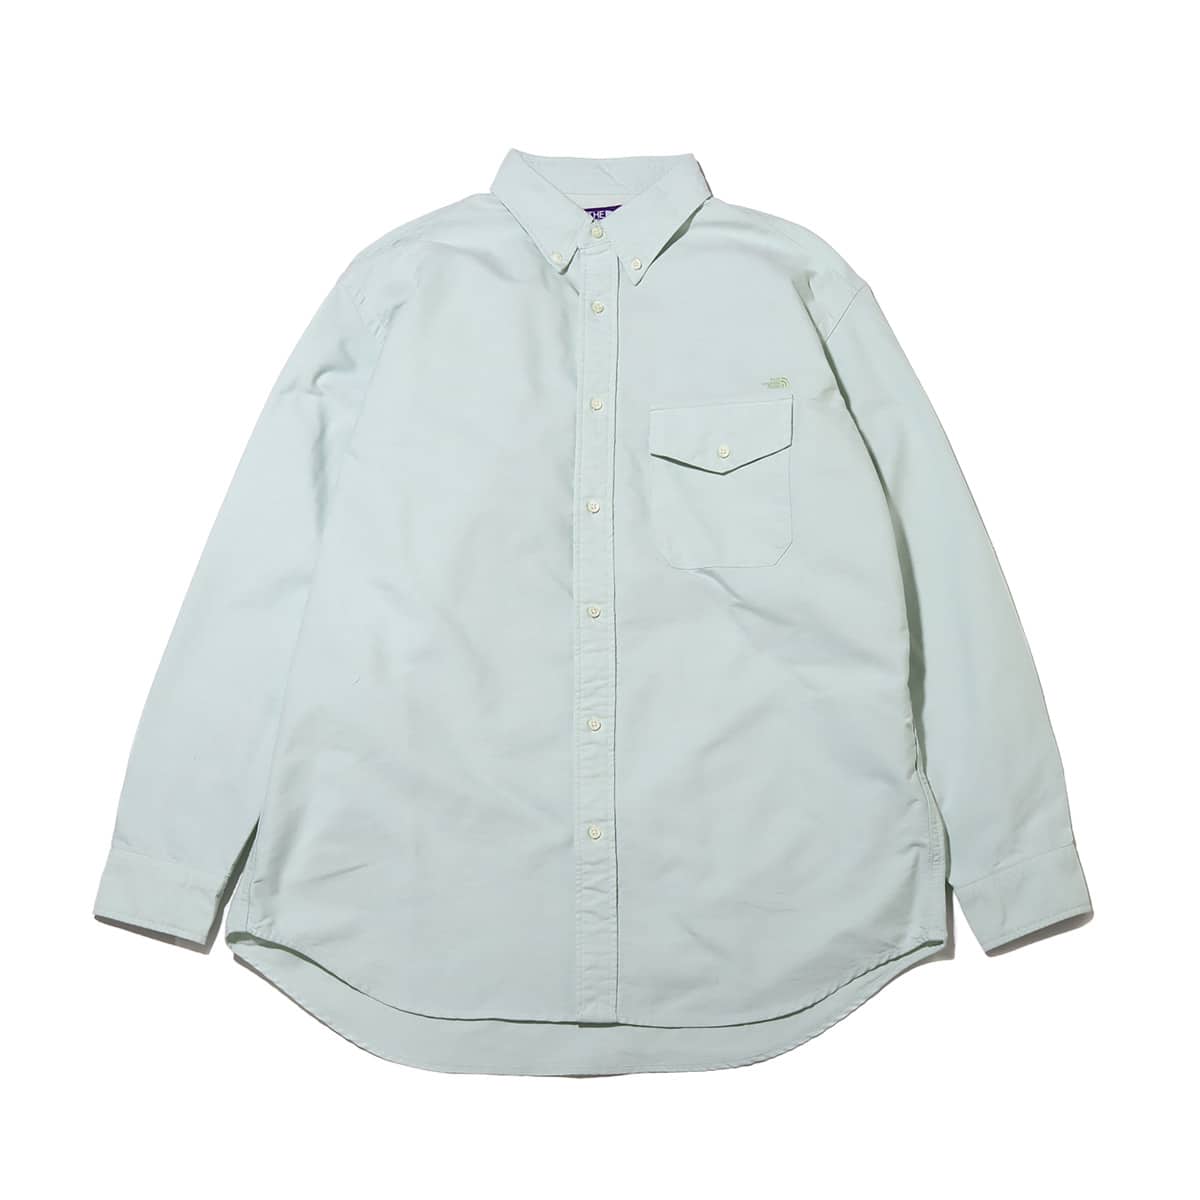 THE NORTH FACE PURPLE LABEL Cotton Polyester OX B.D. Shirt Green 